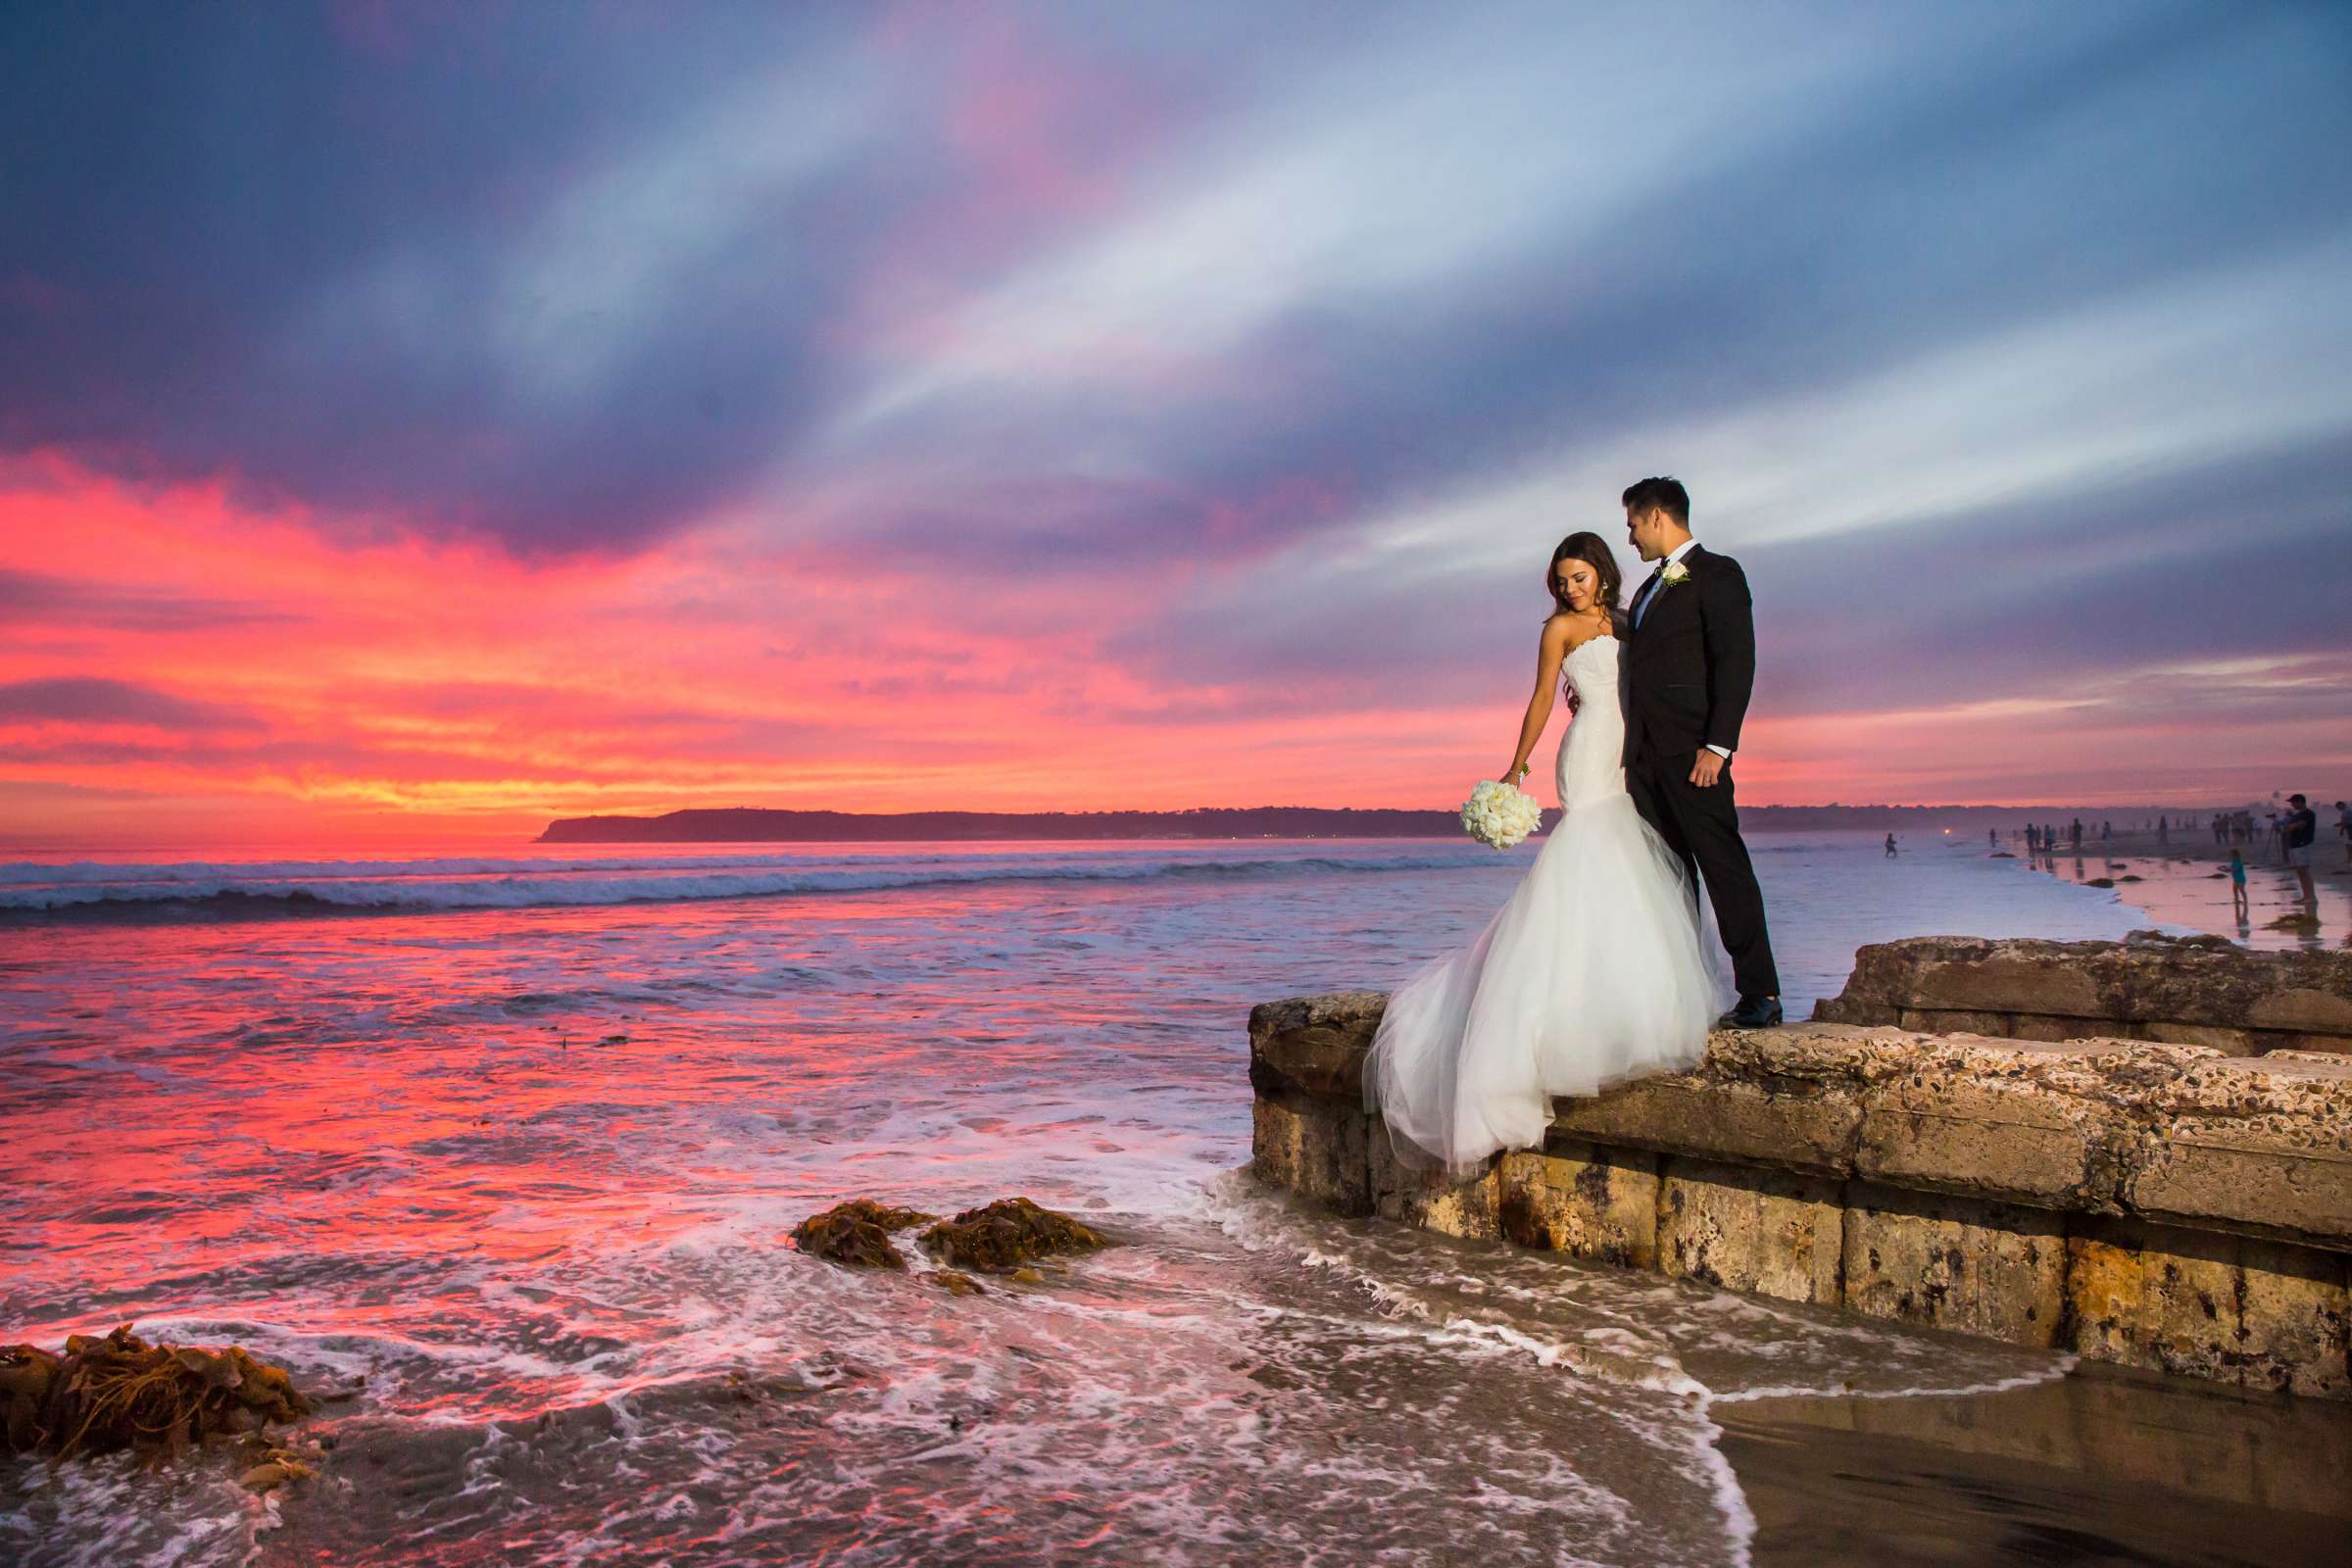 Sunset, Beach, Stylized Portrait at Star of the Sea Event Center Wedding, Karla and Jaime Wedding Photo #1 by True Photography